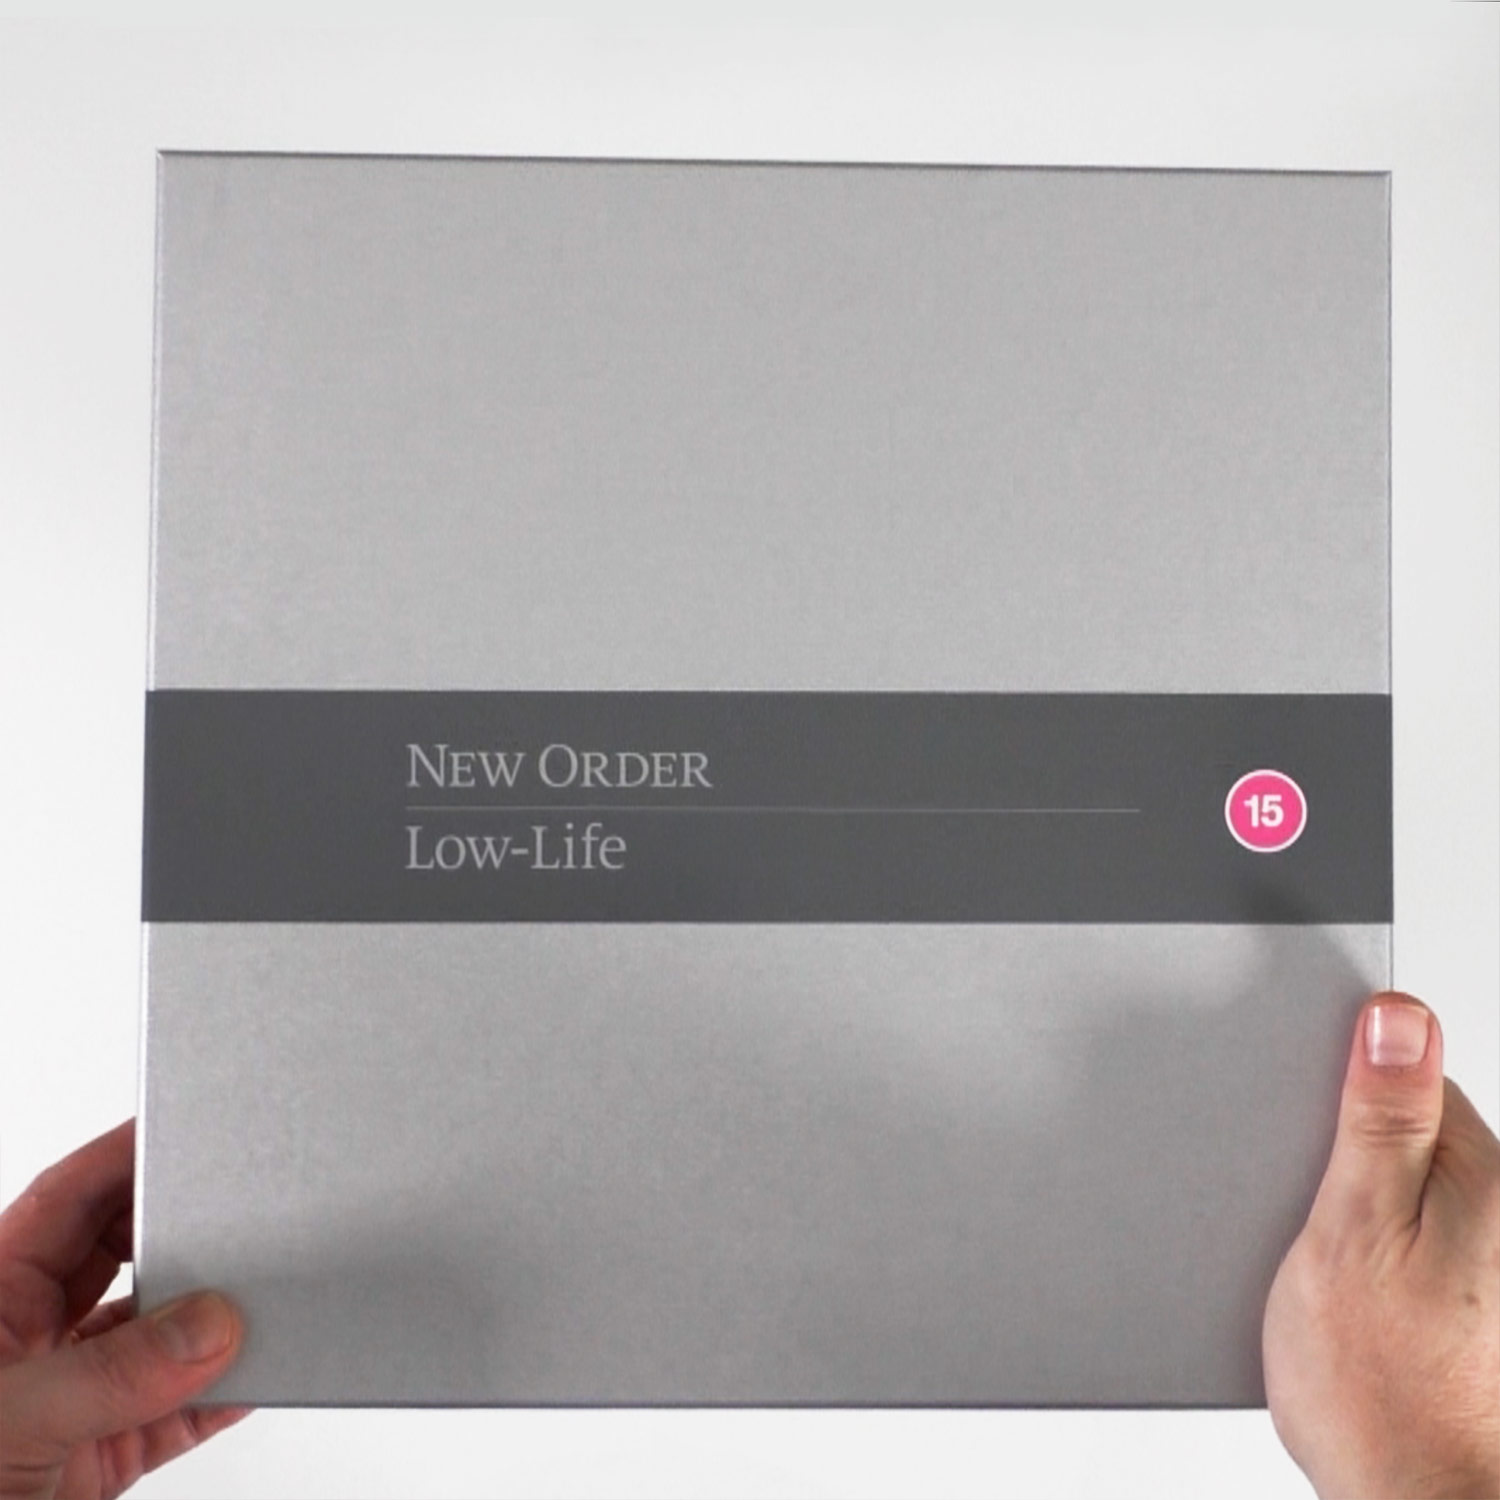 New Order / Low-Life super deluxe unboxing video